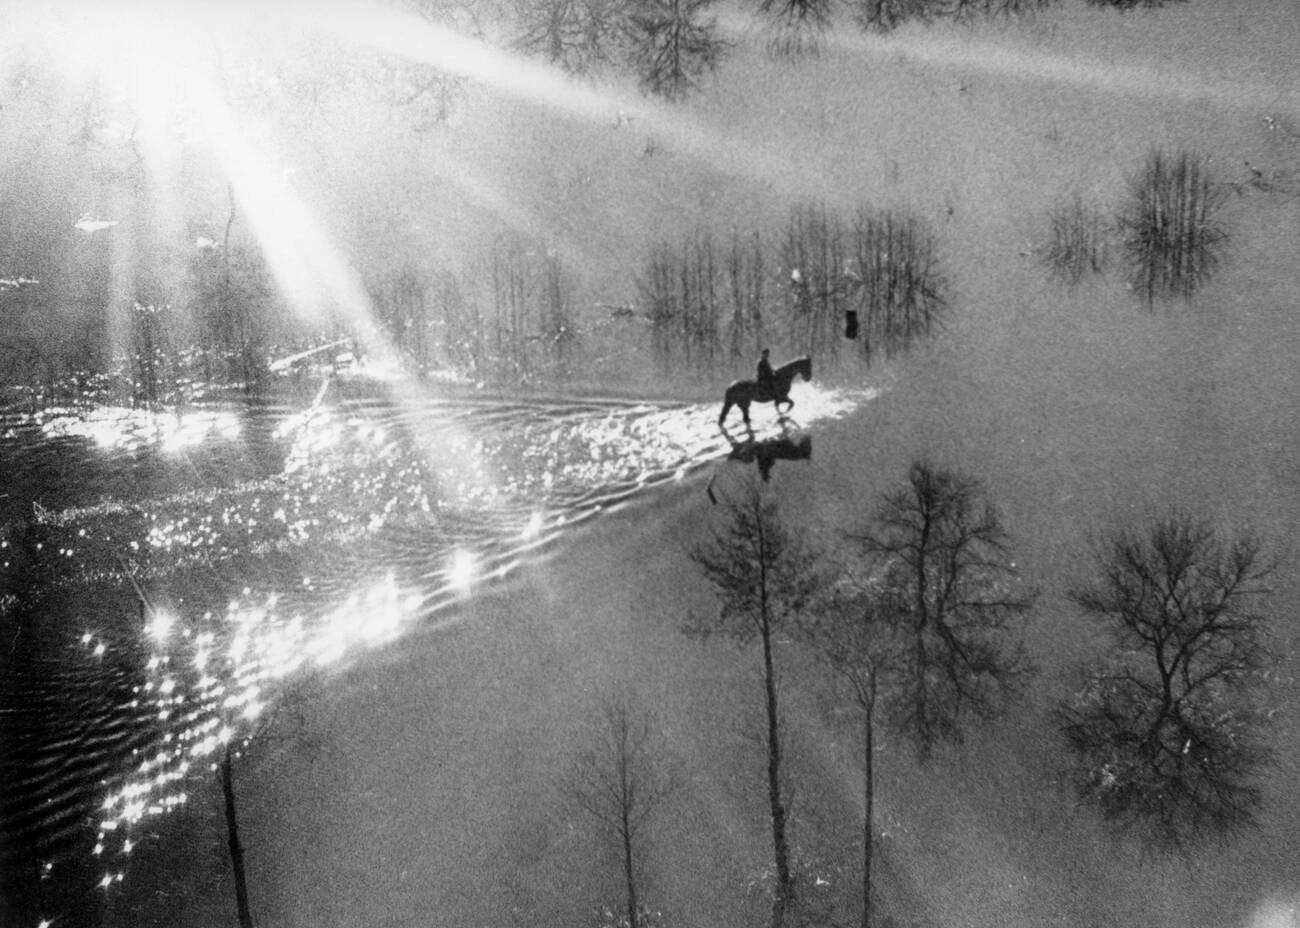 Farmer on horseback searching for his livestock during the North Sea flood of 1962 in Hamburg, West Germany